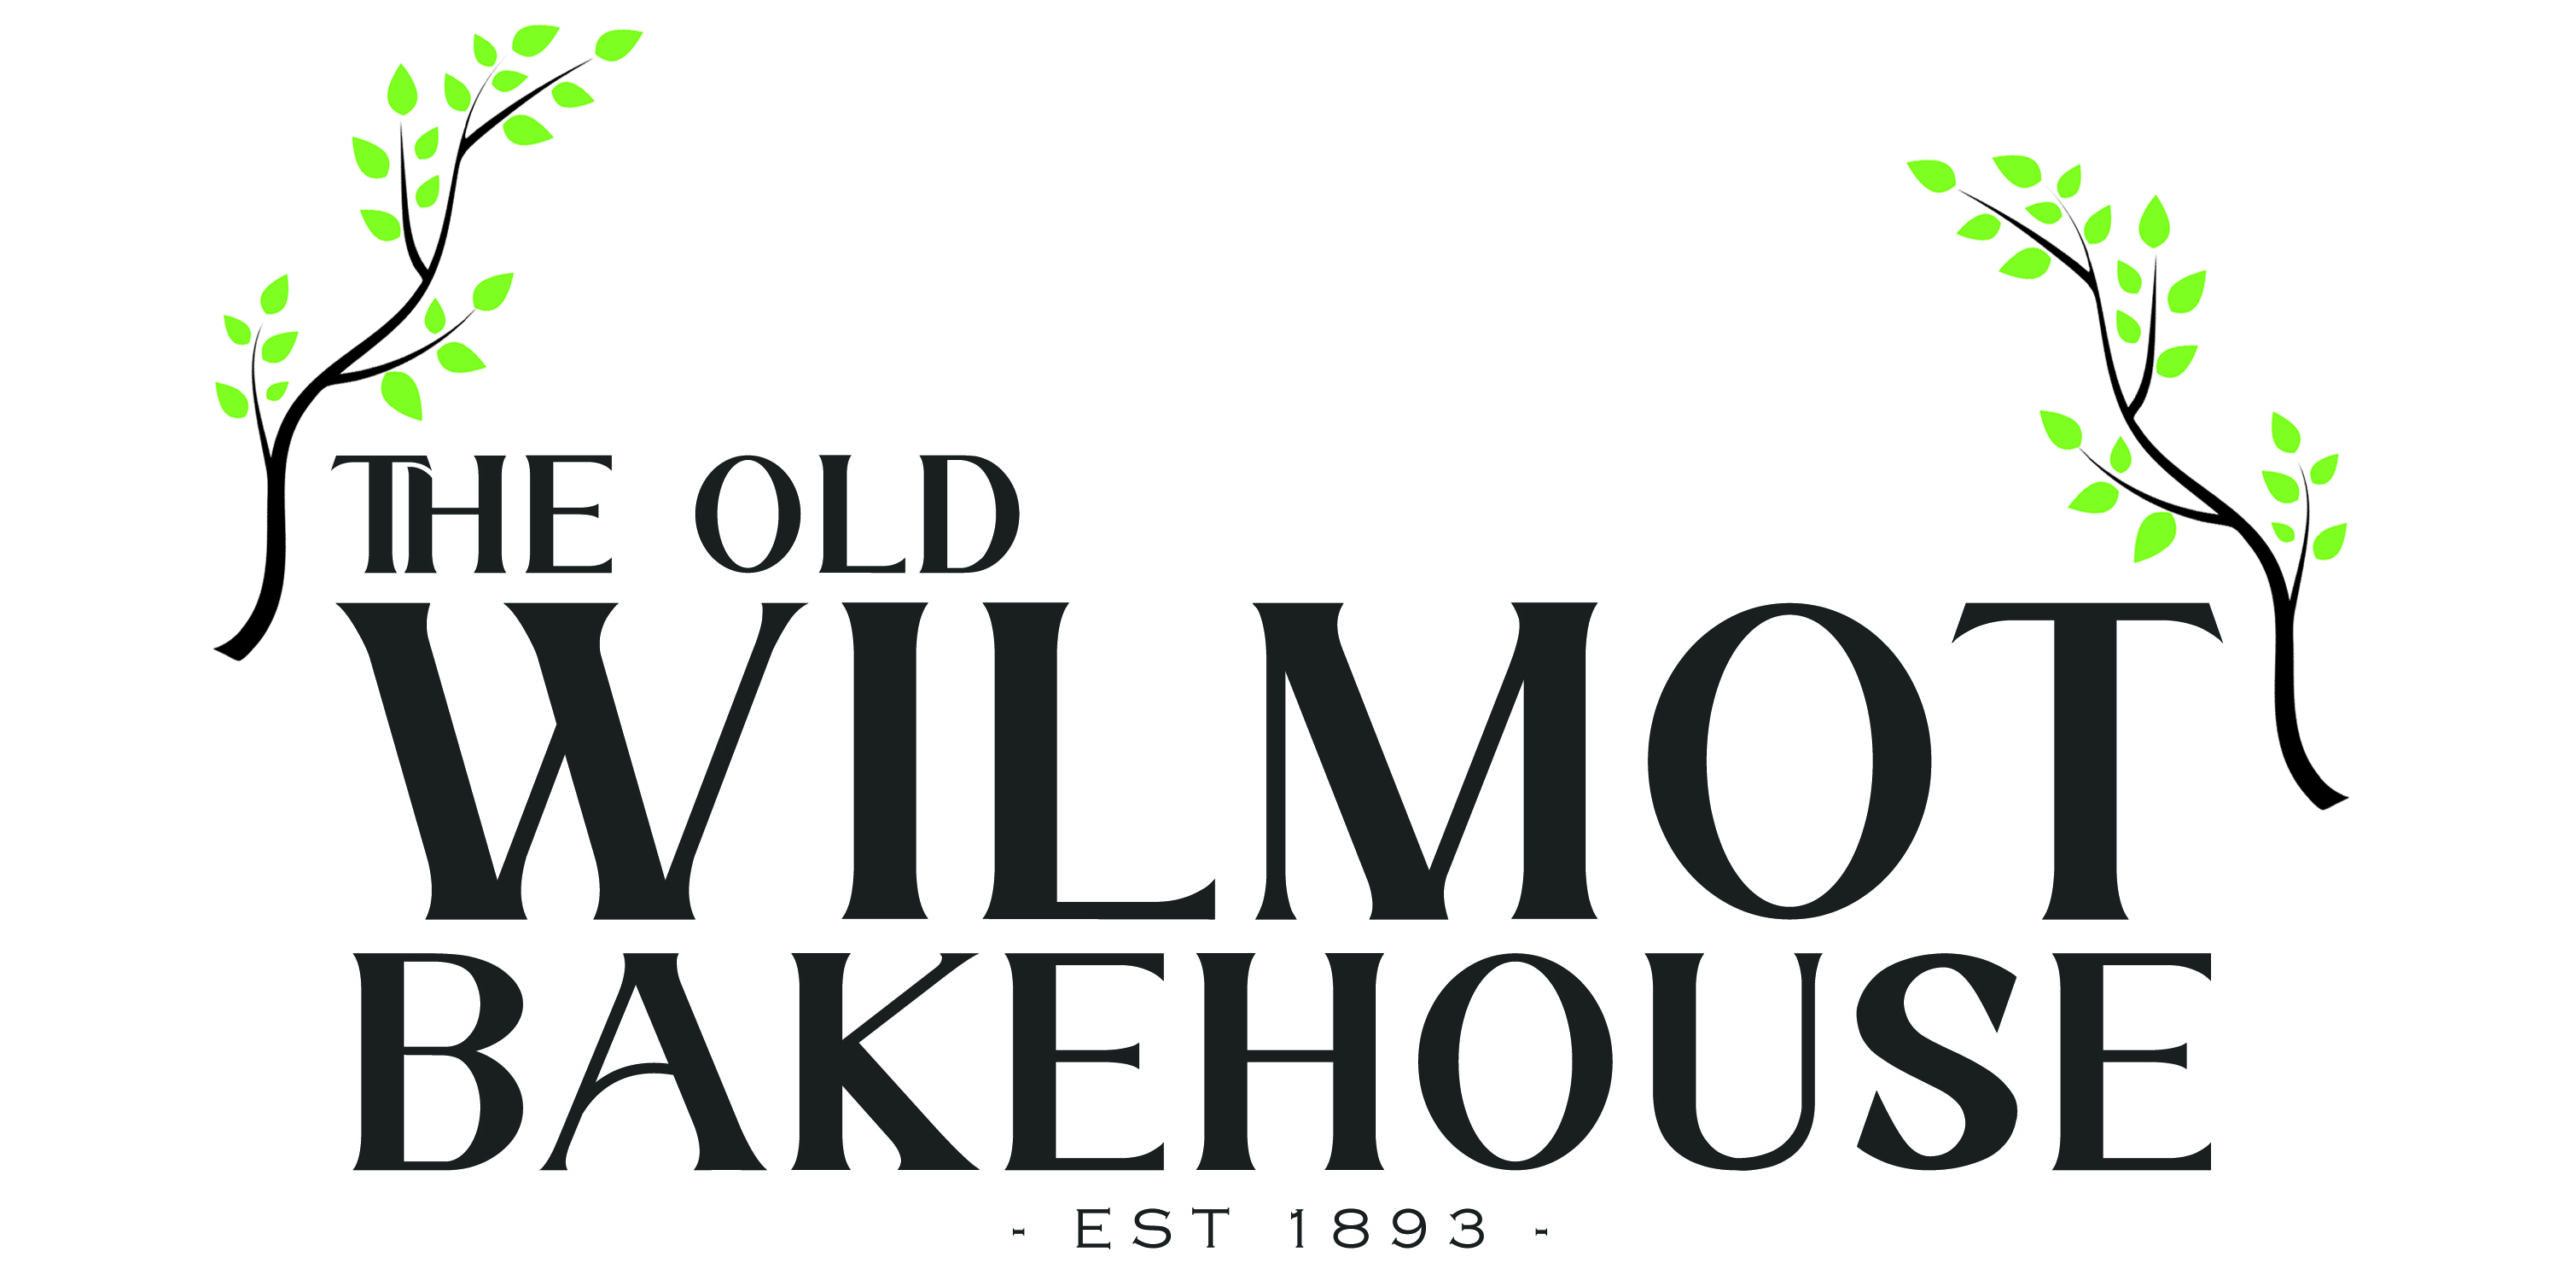 The Old Wilmot Bakehouse